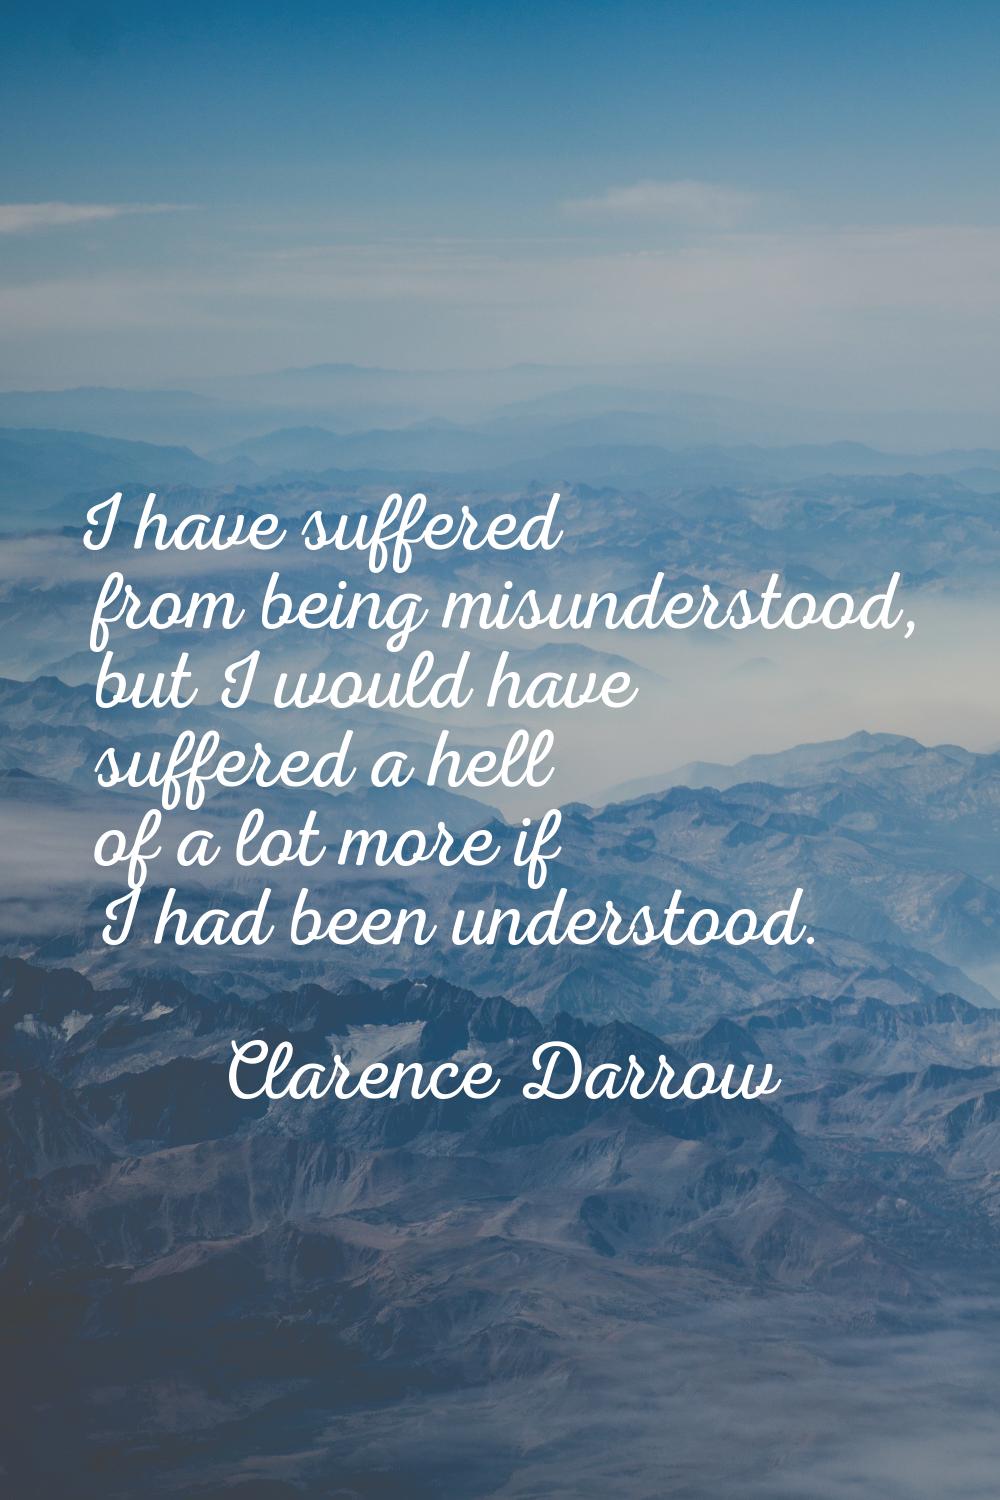 I have suffered from being misunderstood, but I would have suffered a hell of a lot more if I had b